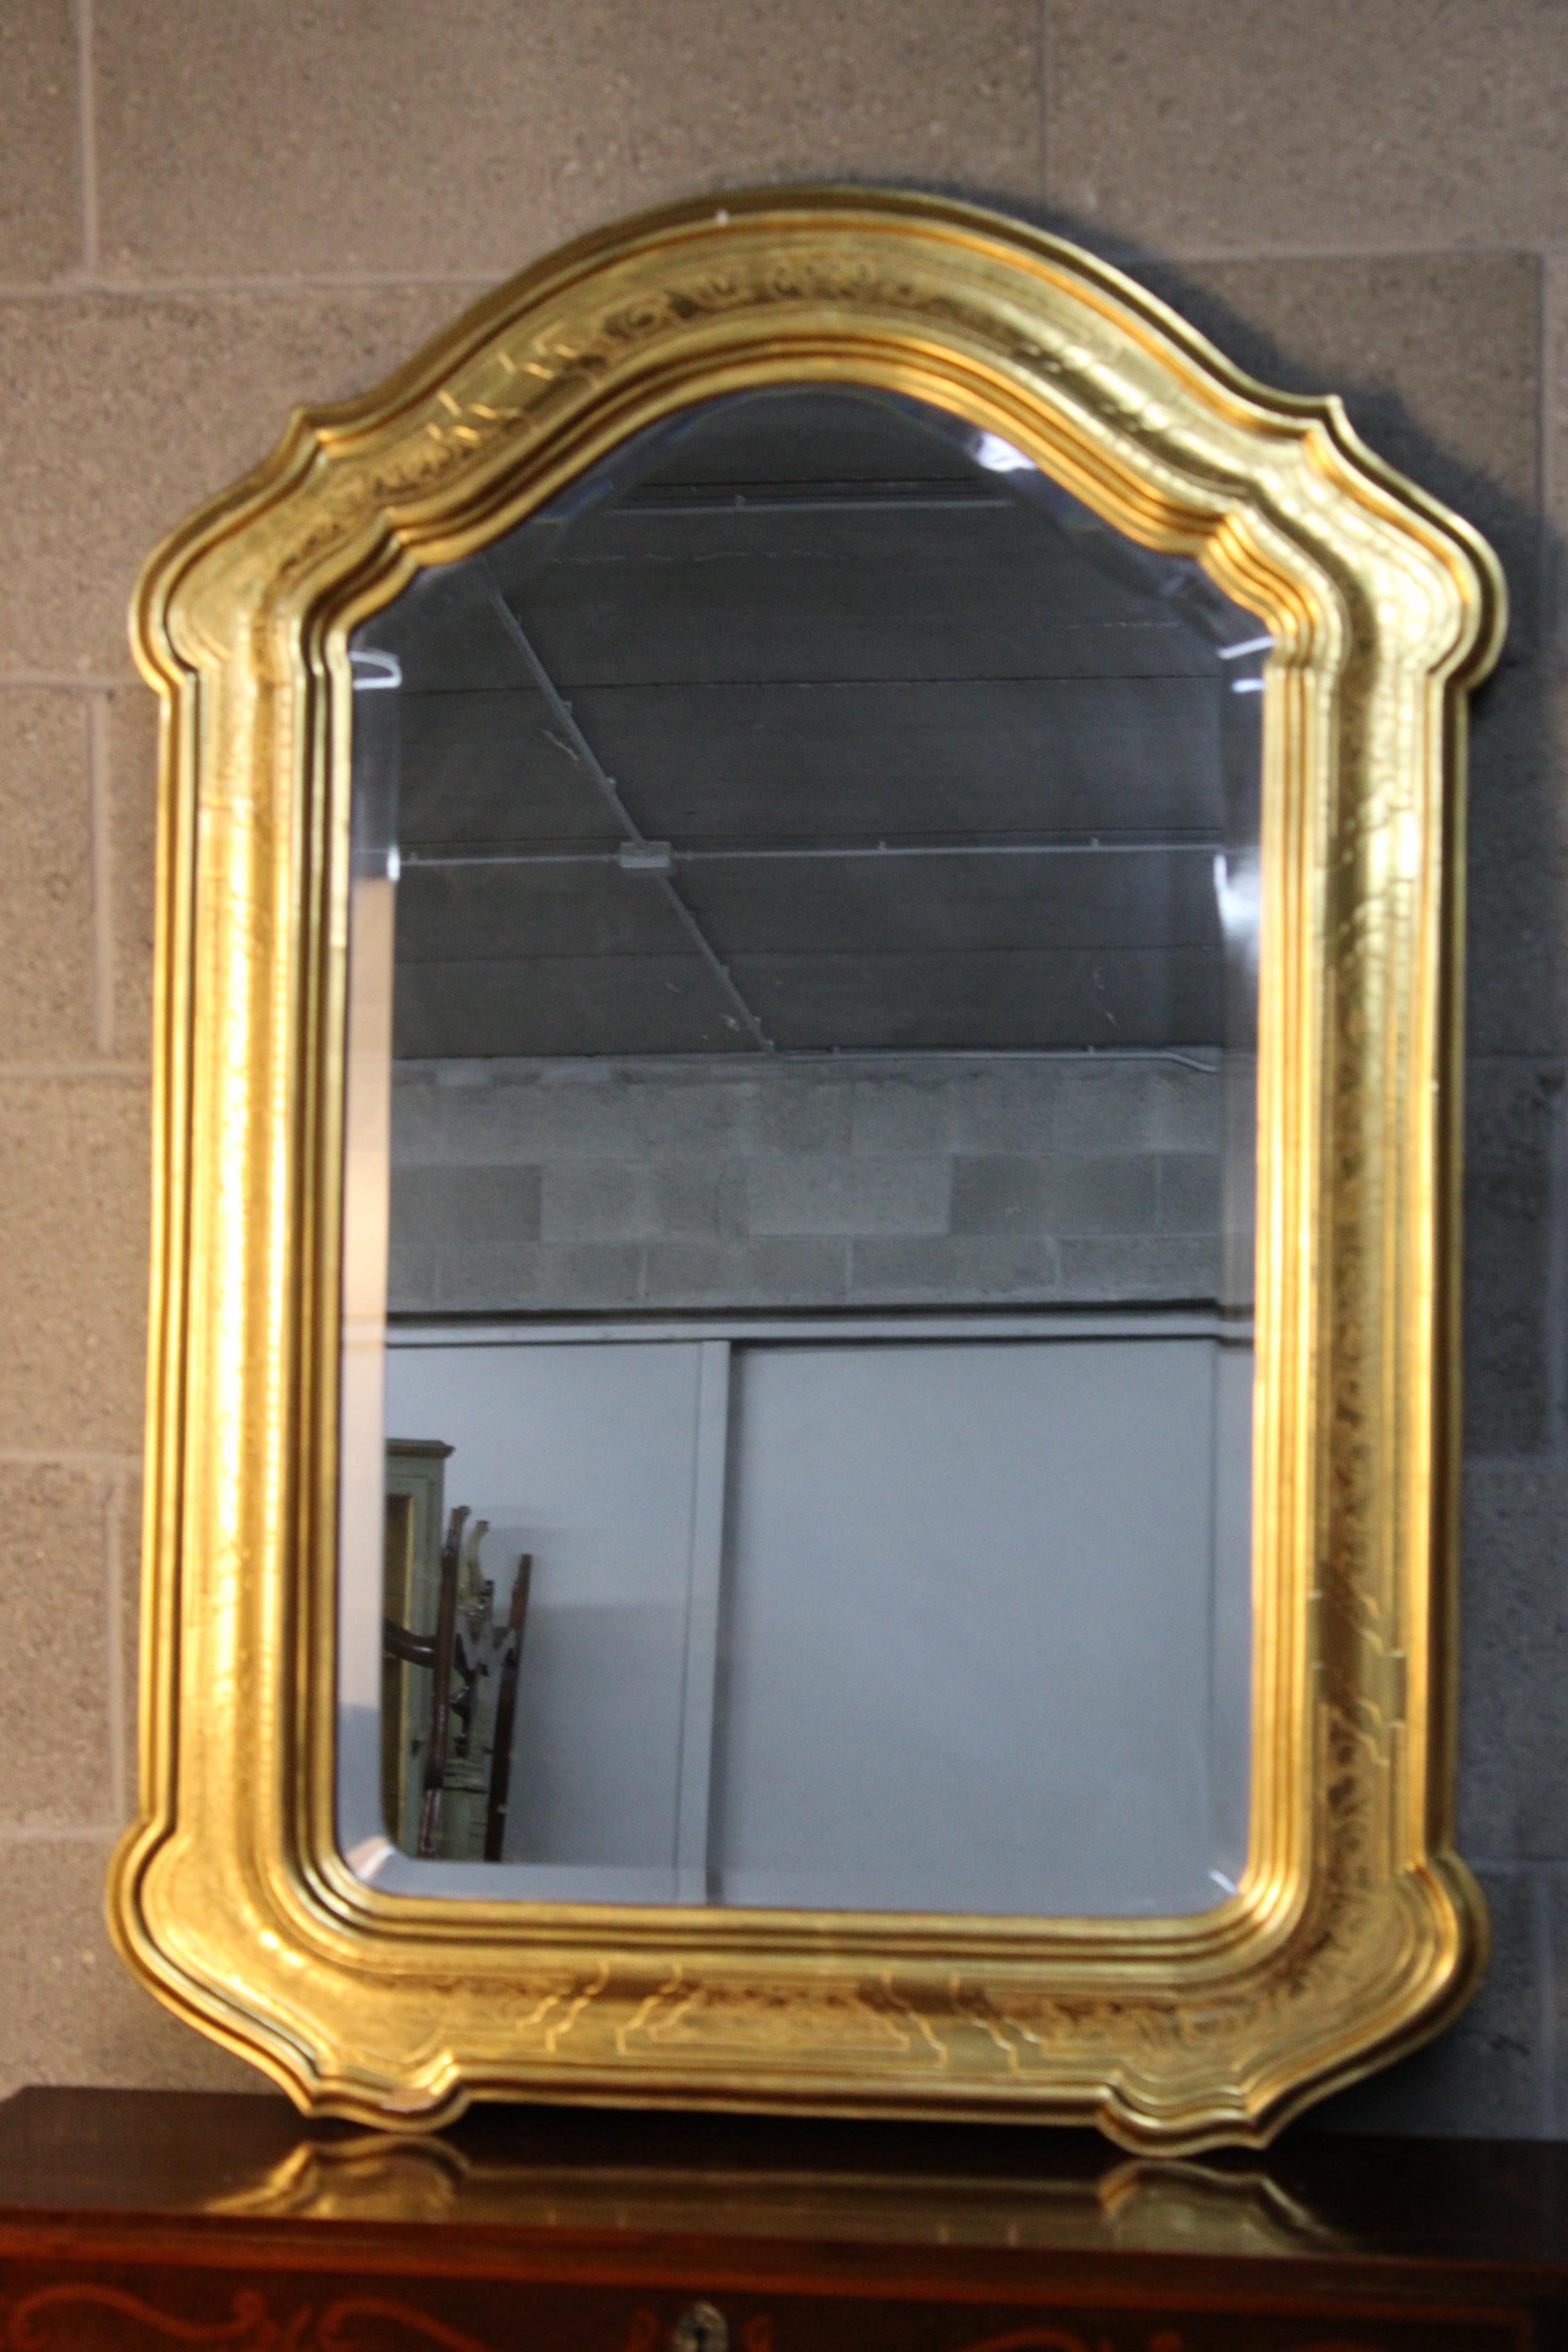 XX.century Louis Philippe style  golden wall mirror circa 1900-1920 Italy  
carved wood and used original golden 24K to cover the frame 
Beautiful rich detailed work on the frame .
will be shipped inside a wood secured box
storage and container